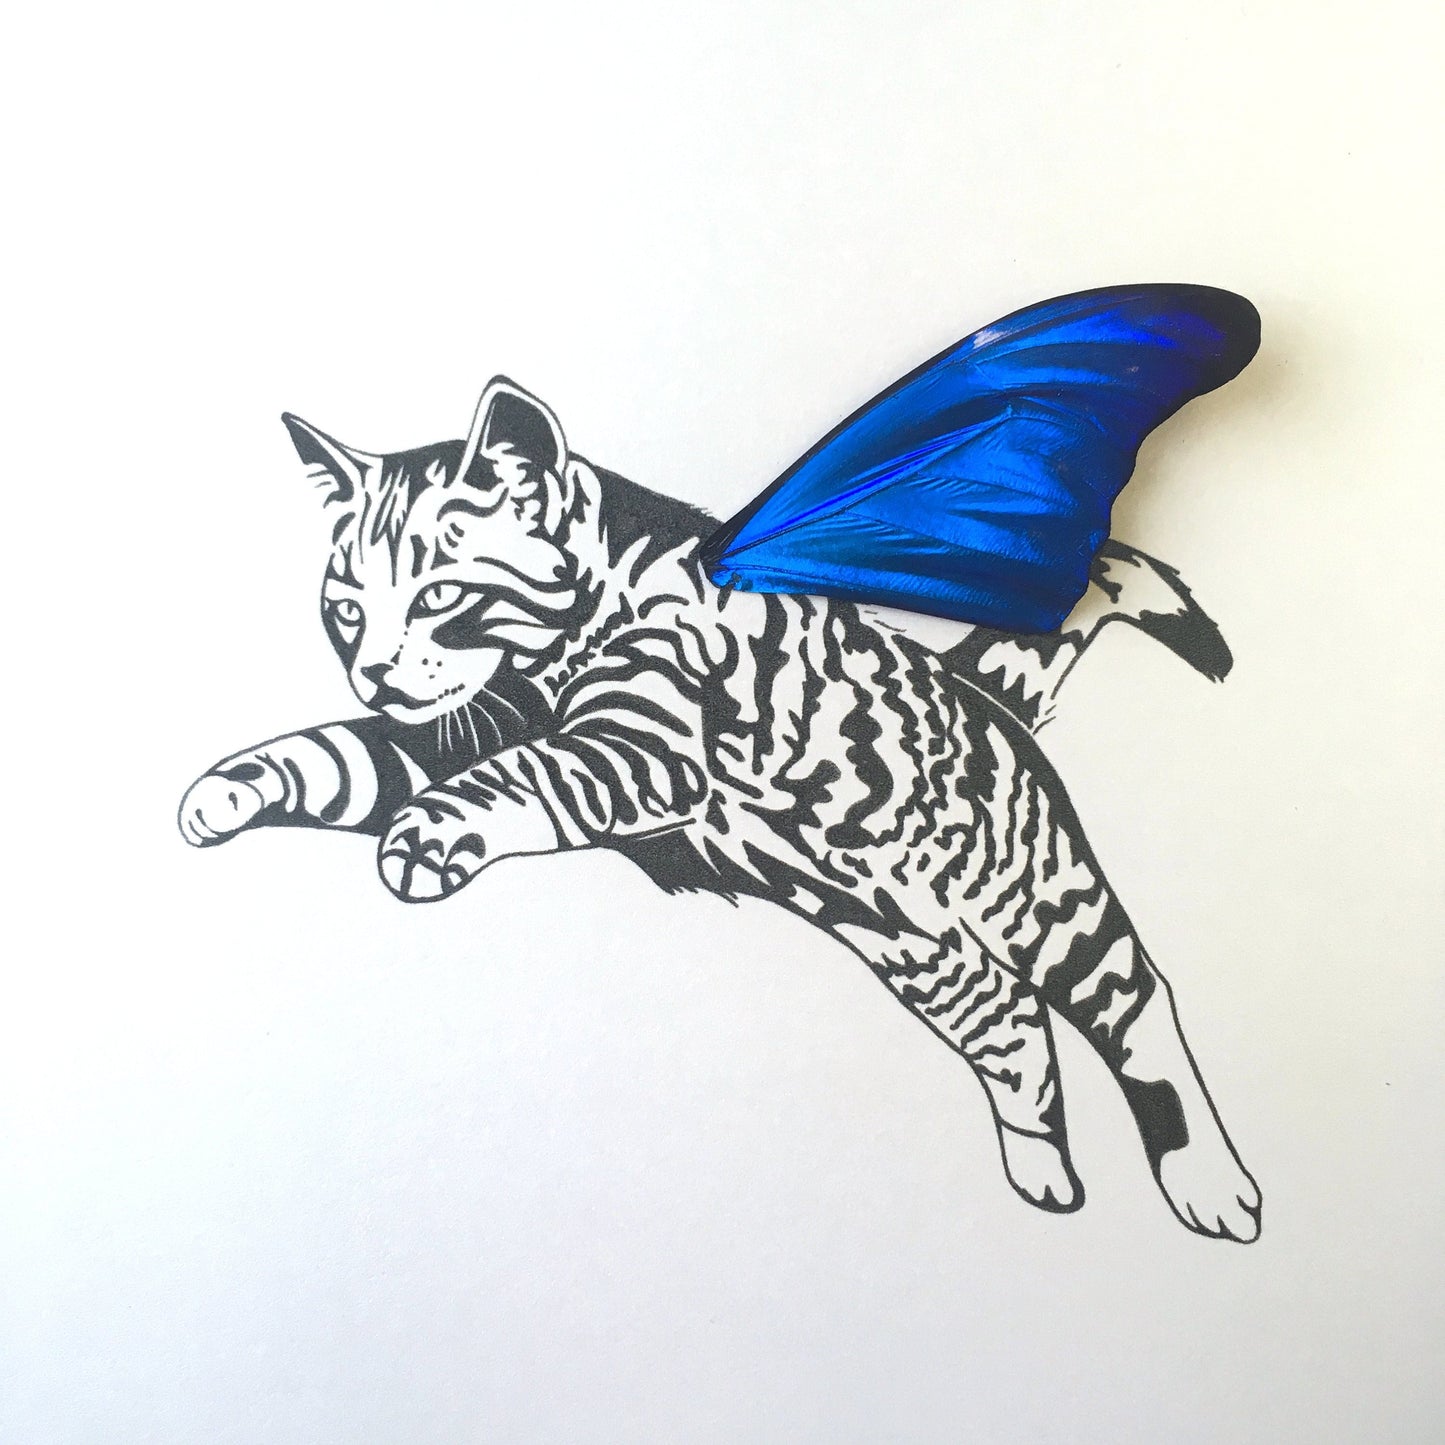 Tabby Striped Cat Real Butterfly Wing Art From and For Conservation